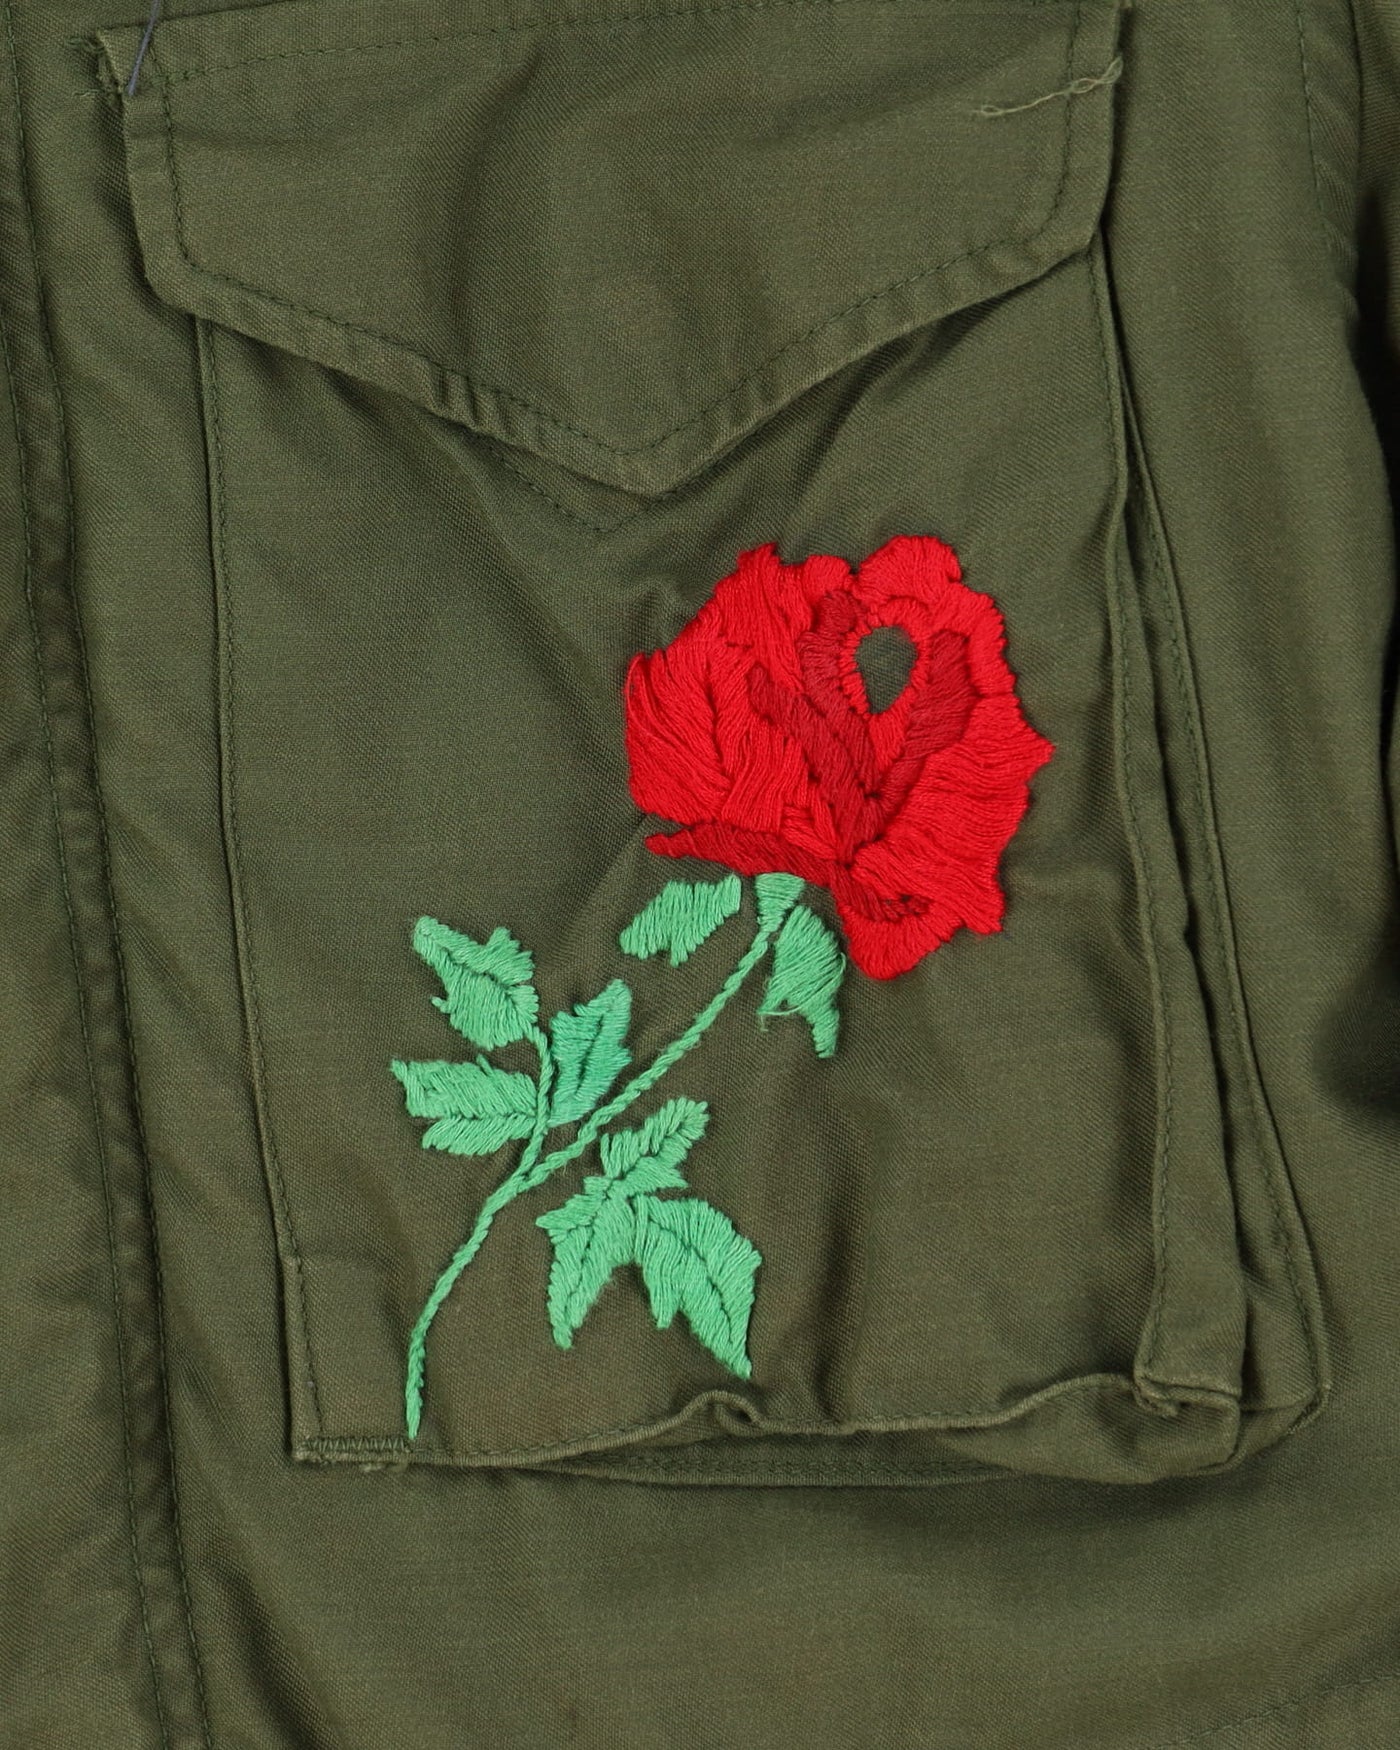 70s Vintage Embroidered Led Zeppelin US Army OG-107 M65 Field Jacket - Small